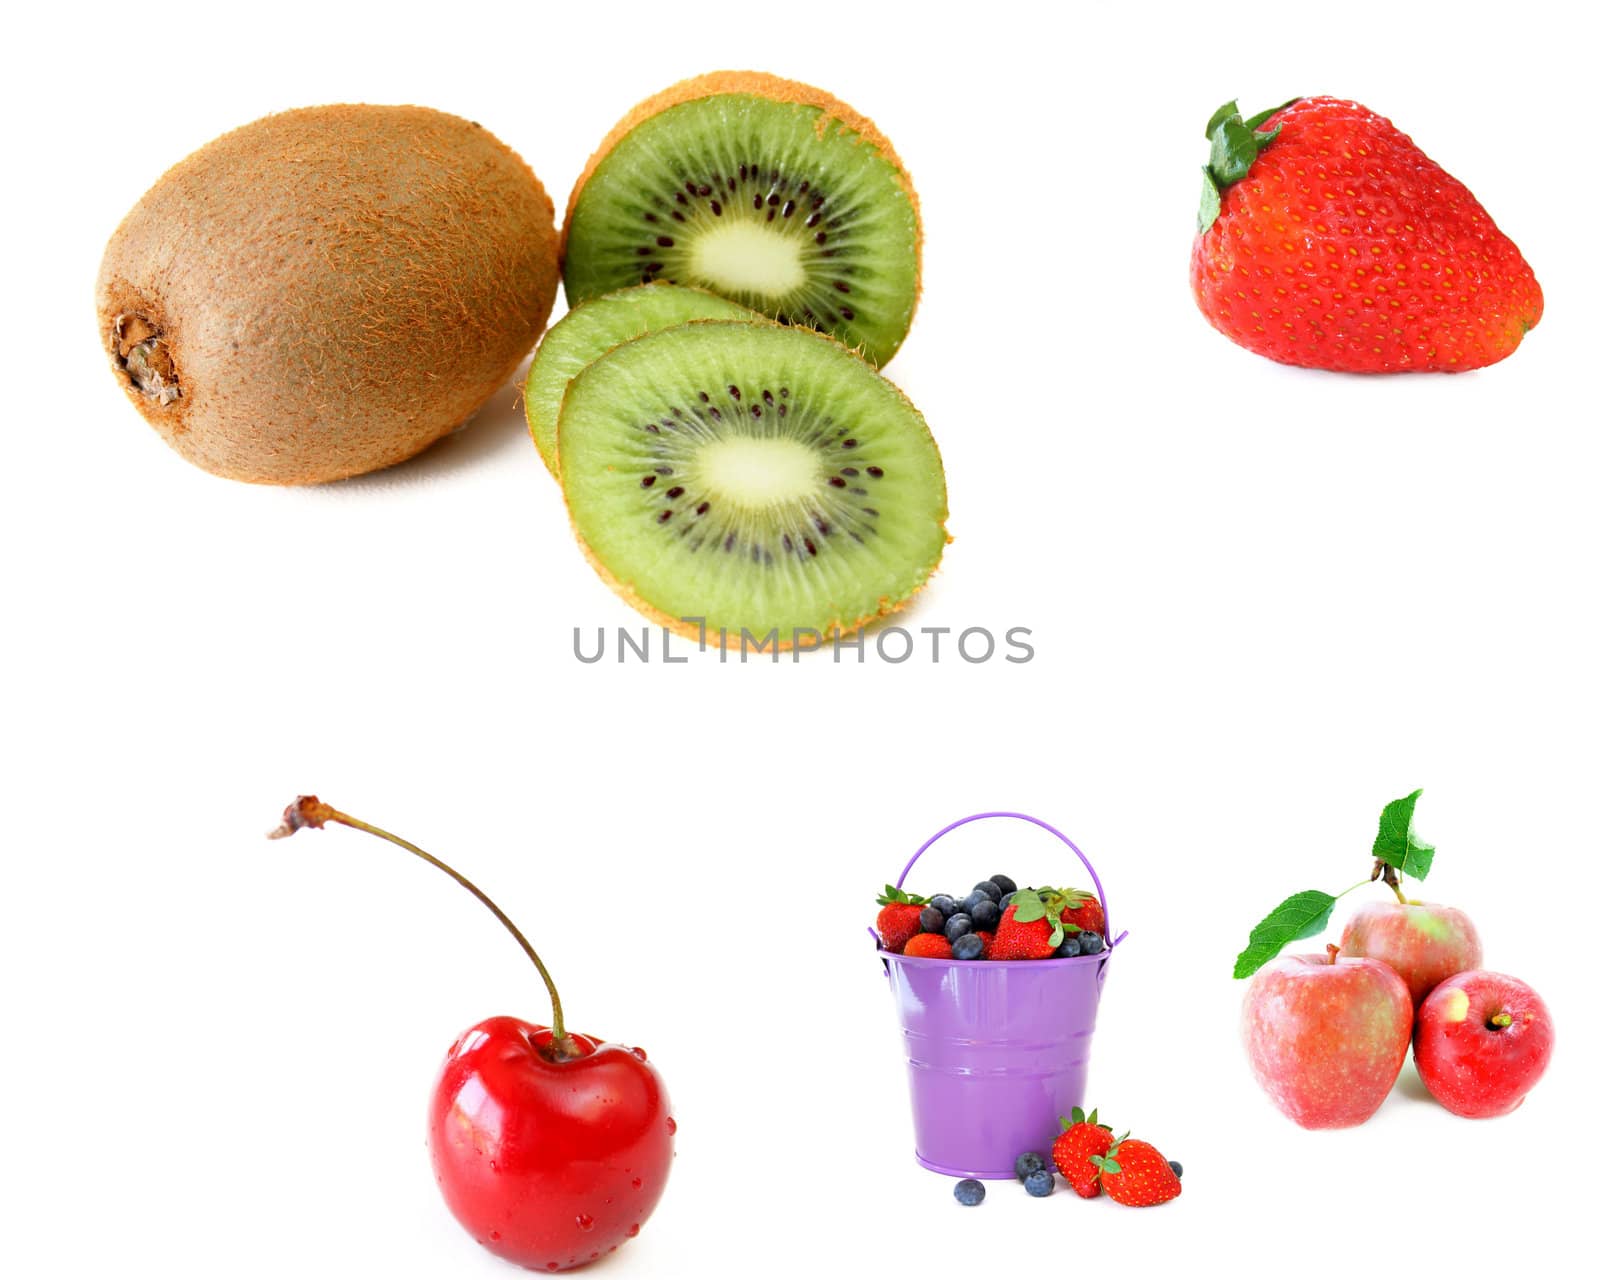 Collection of fruit in a collage on white.